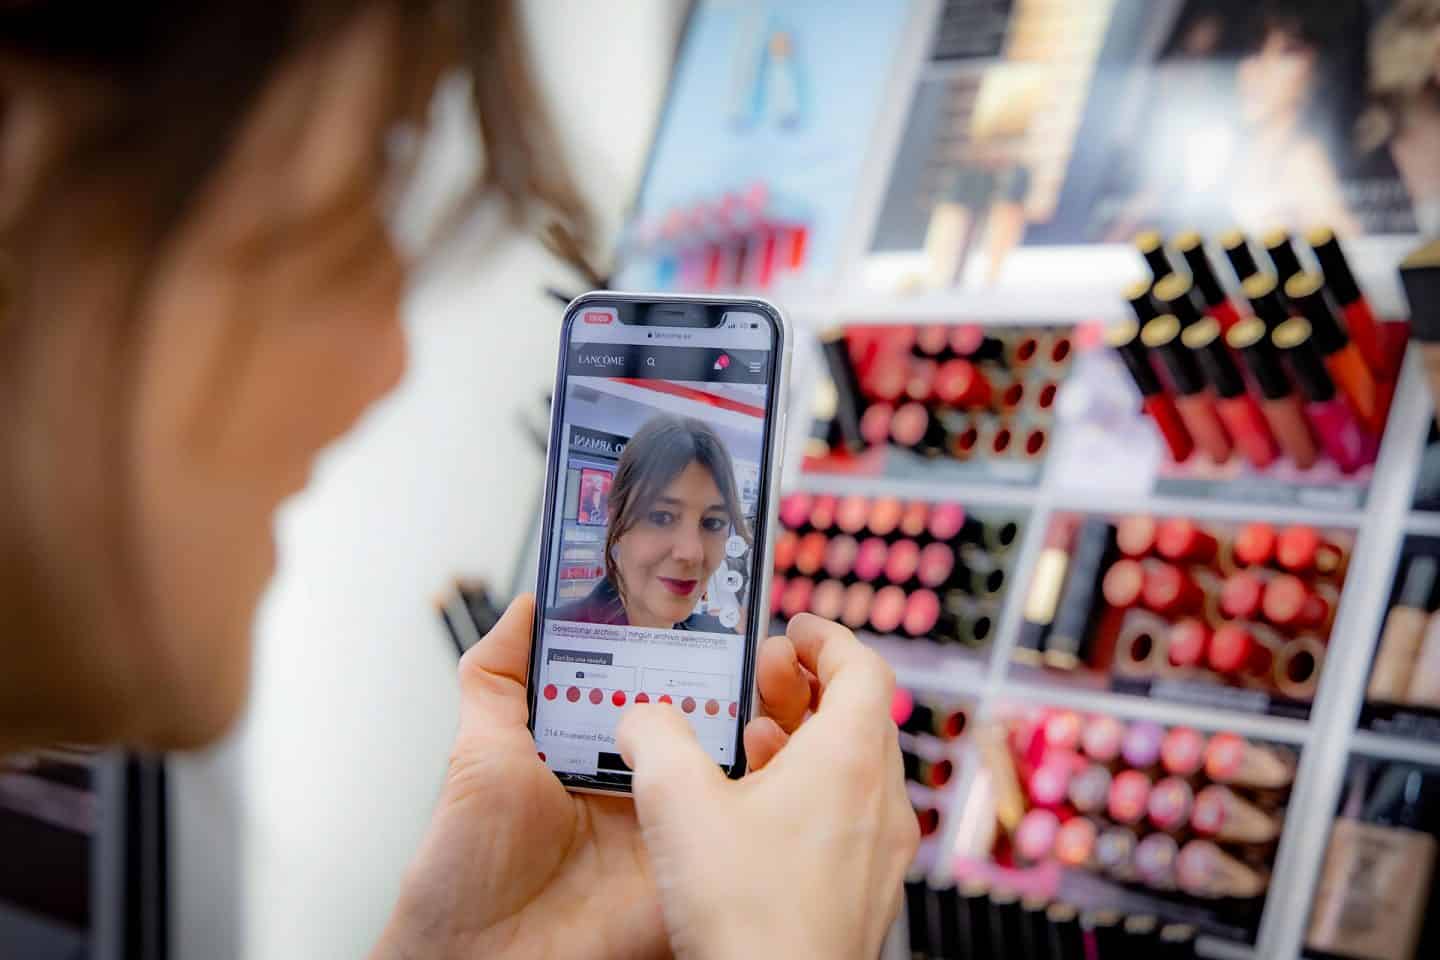 A person using their mobile phone camera to view makeup through augmented reality.